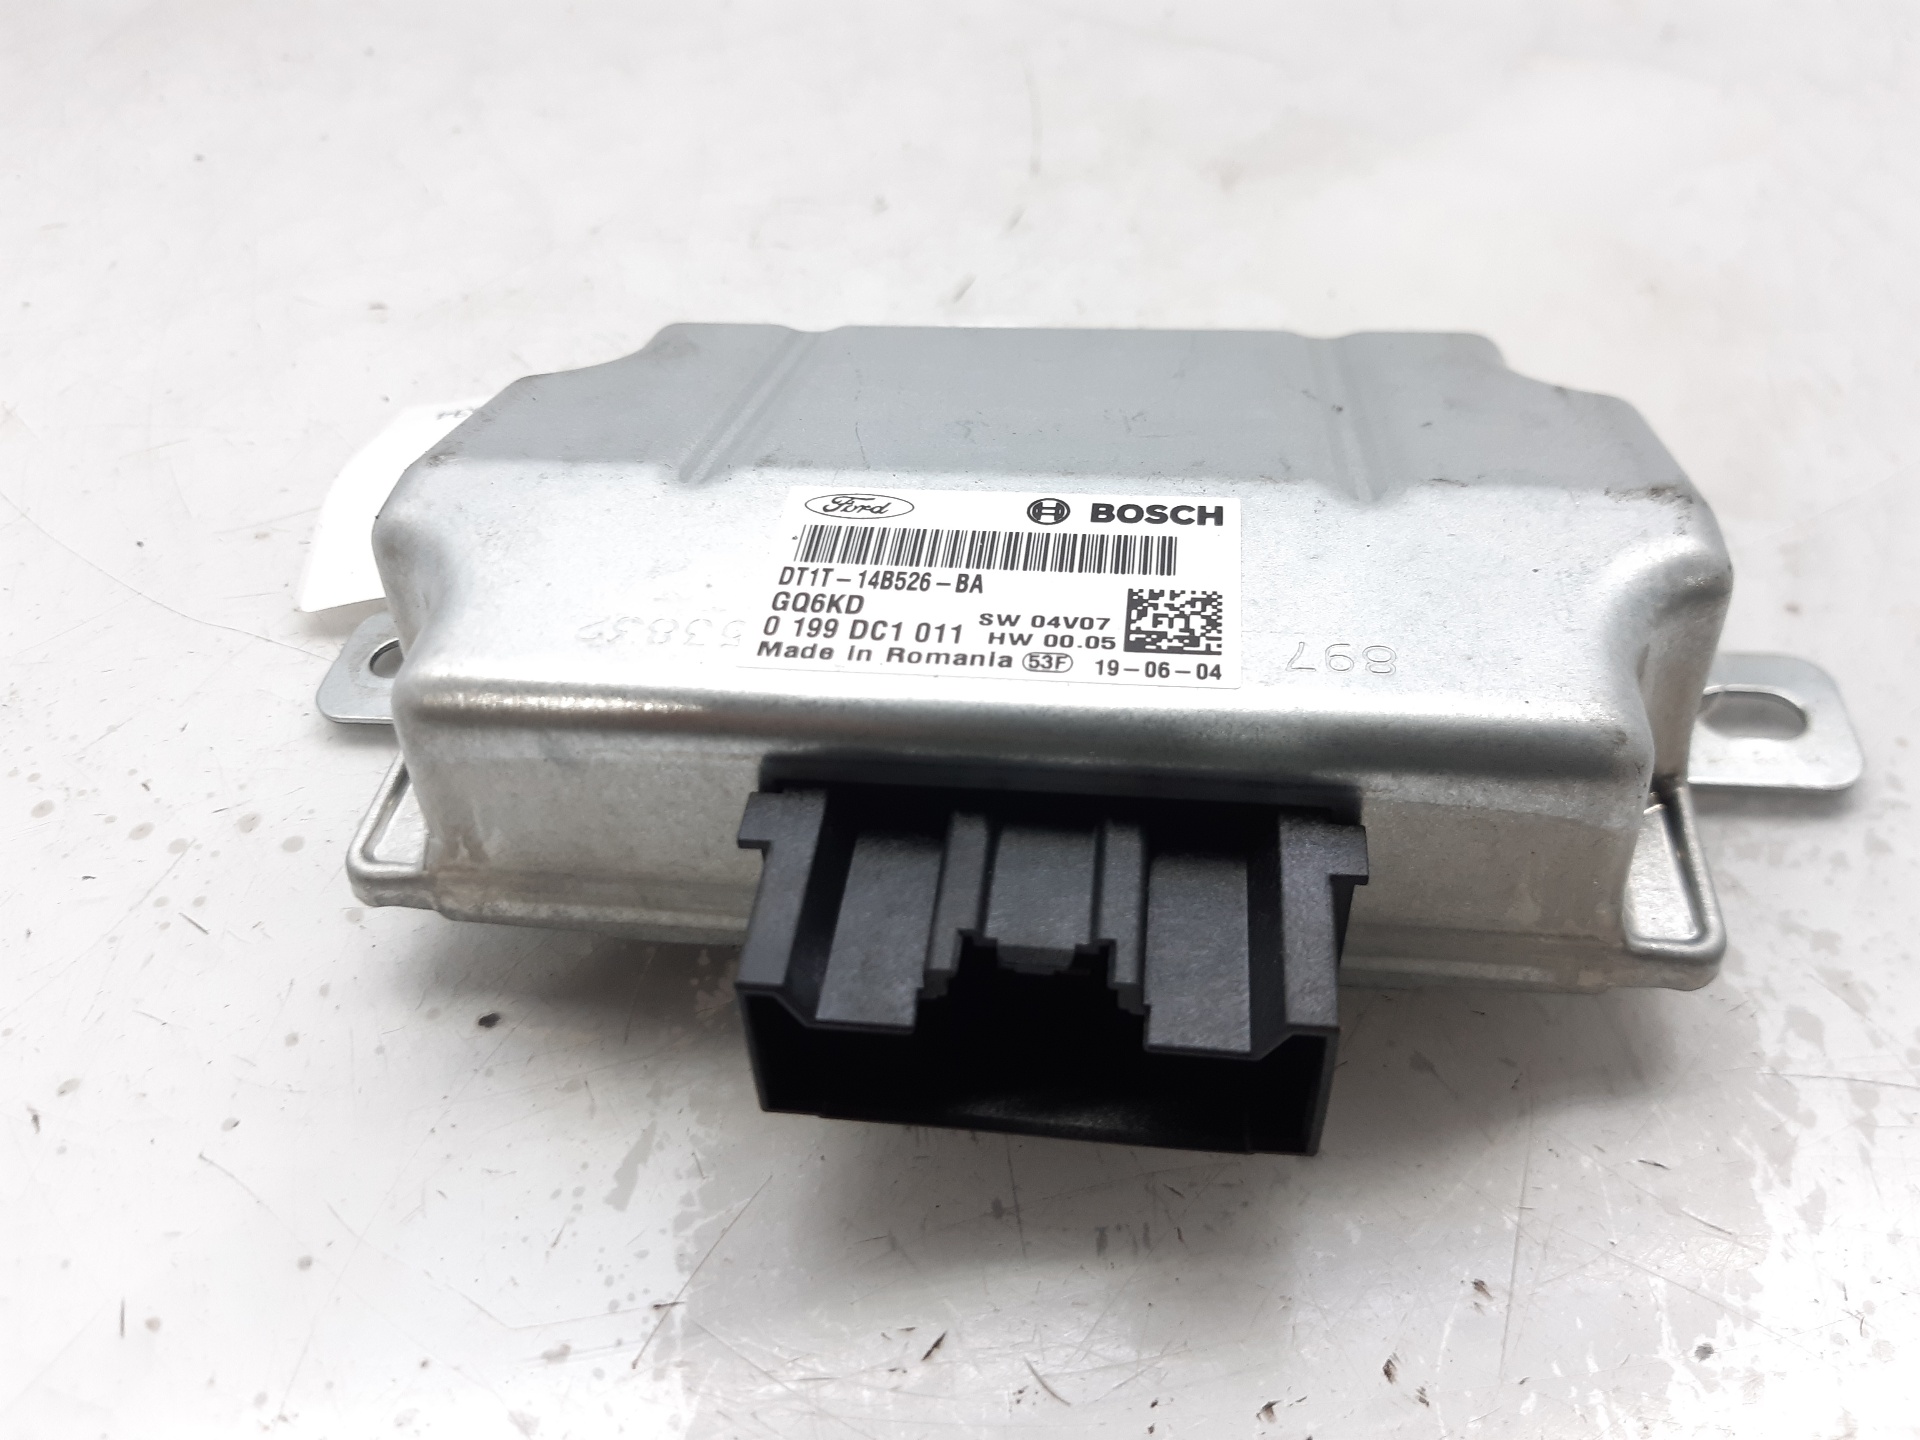 FORD Kuga 2 generation (2013-2020) Other Control Units DT1T14B526BA 18688816